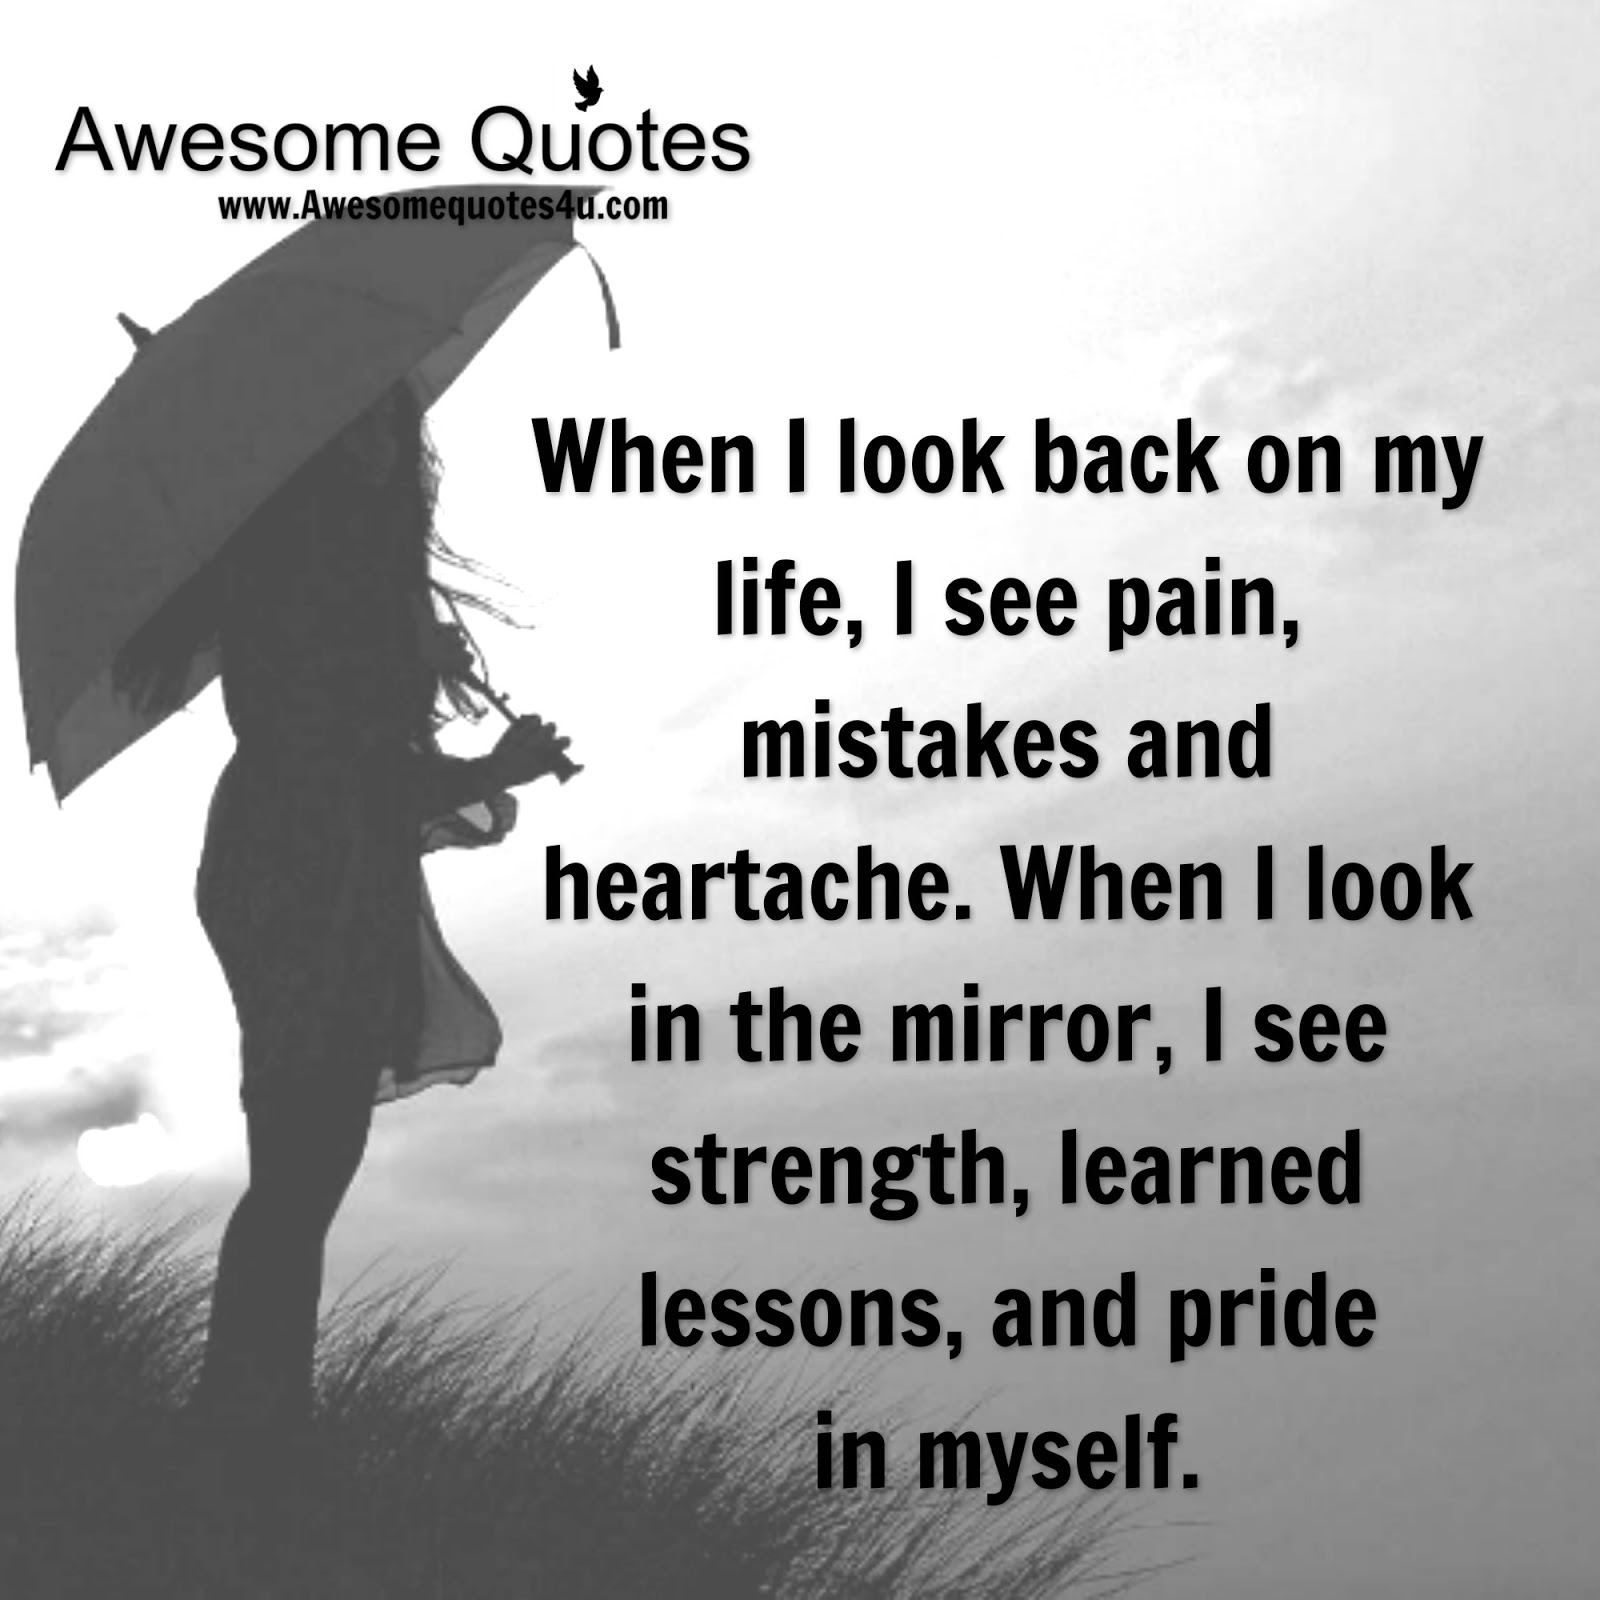 When I look back on my life, I see pain, mistakes and heartache. 